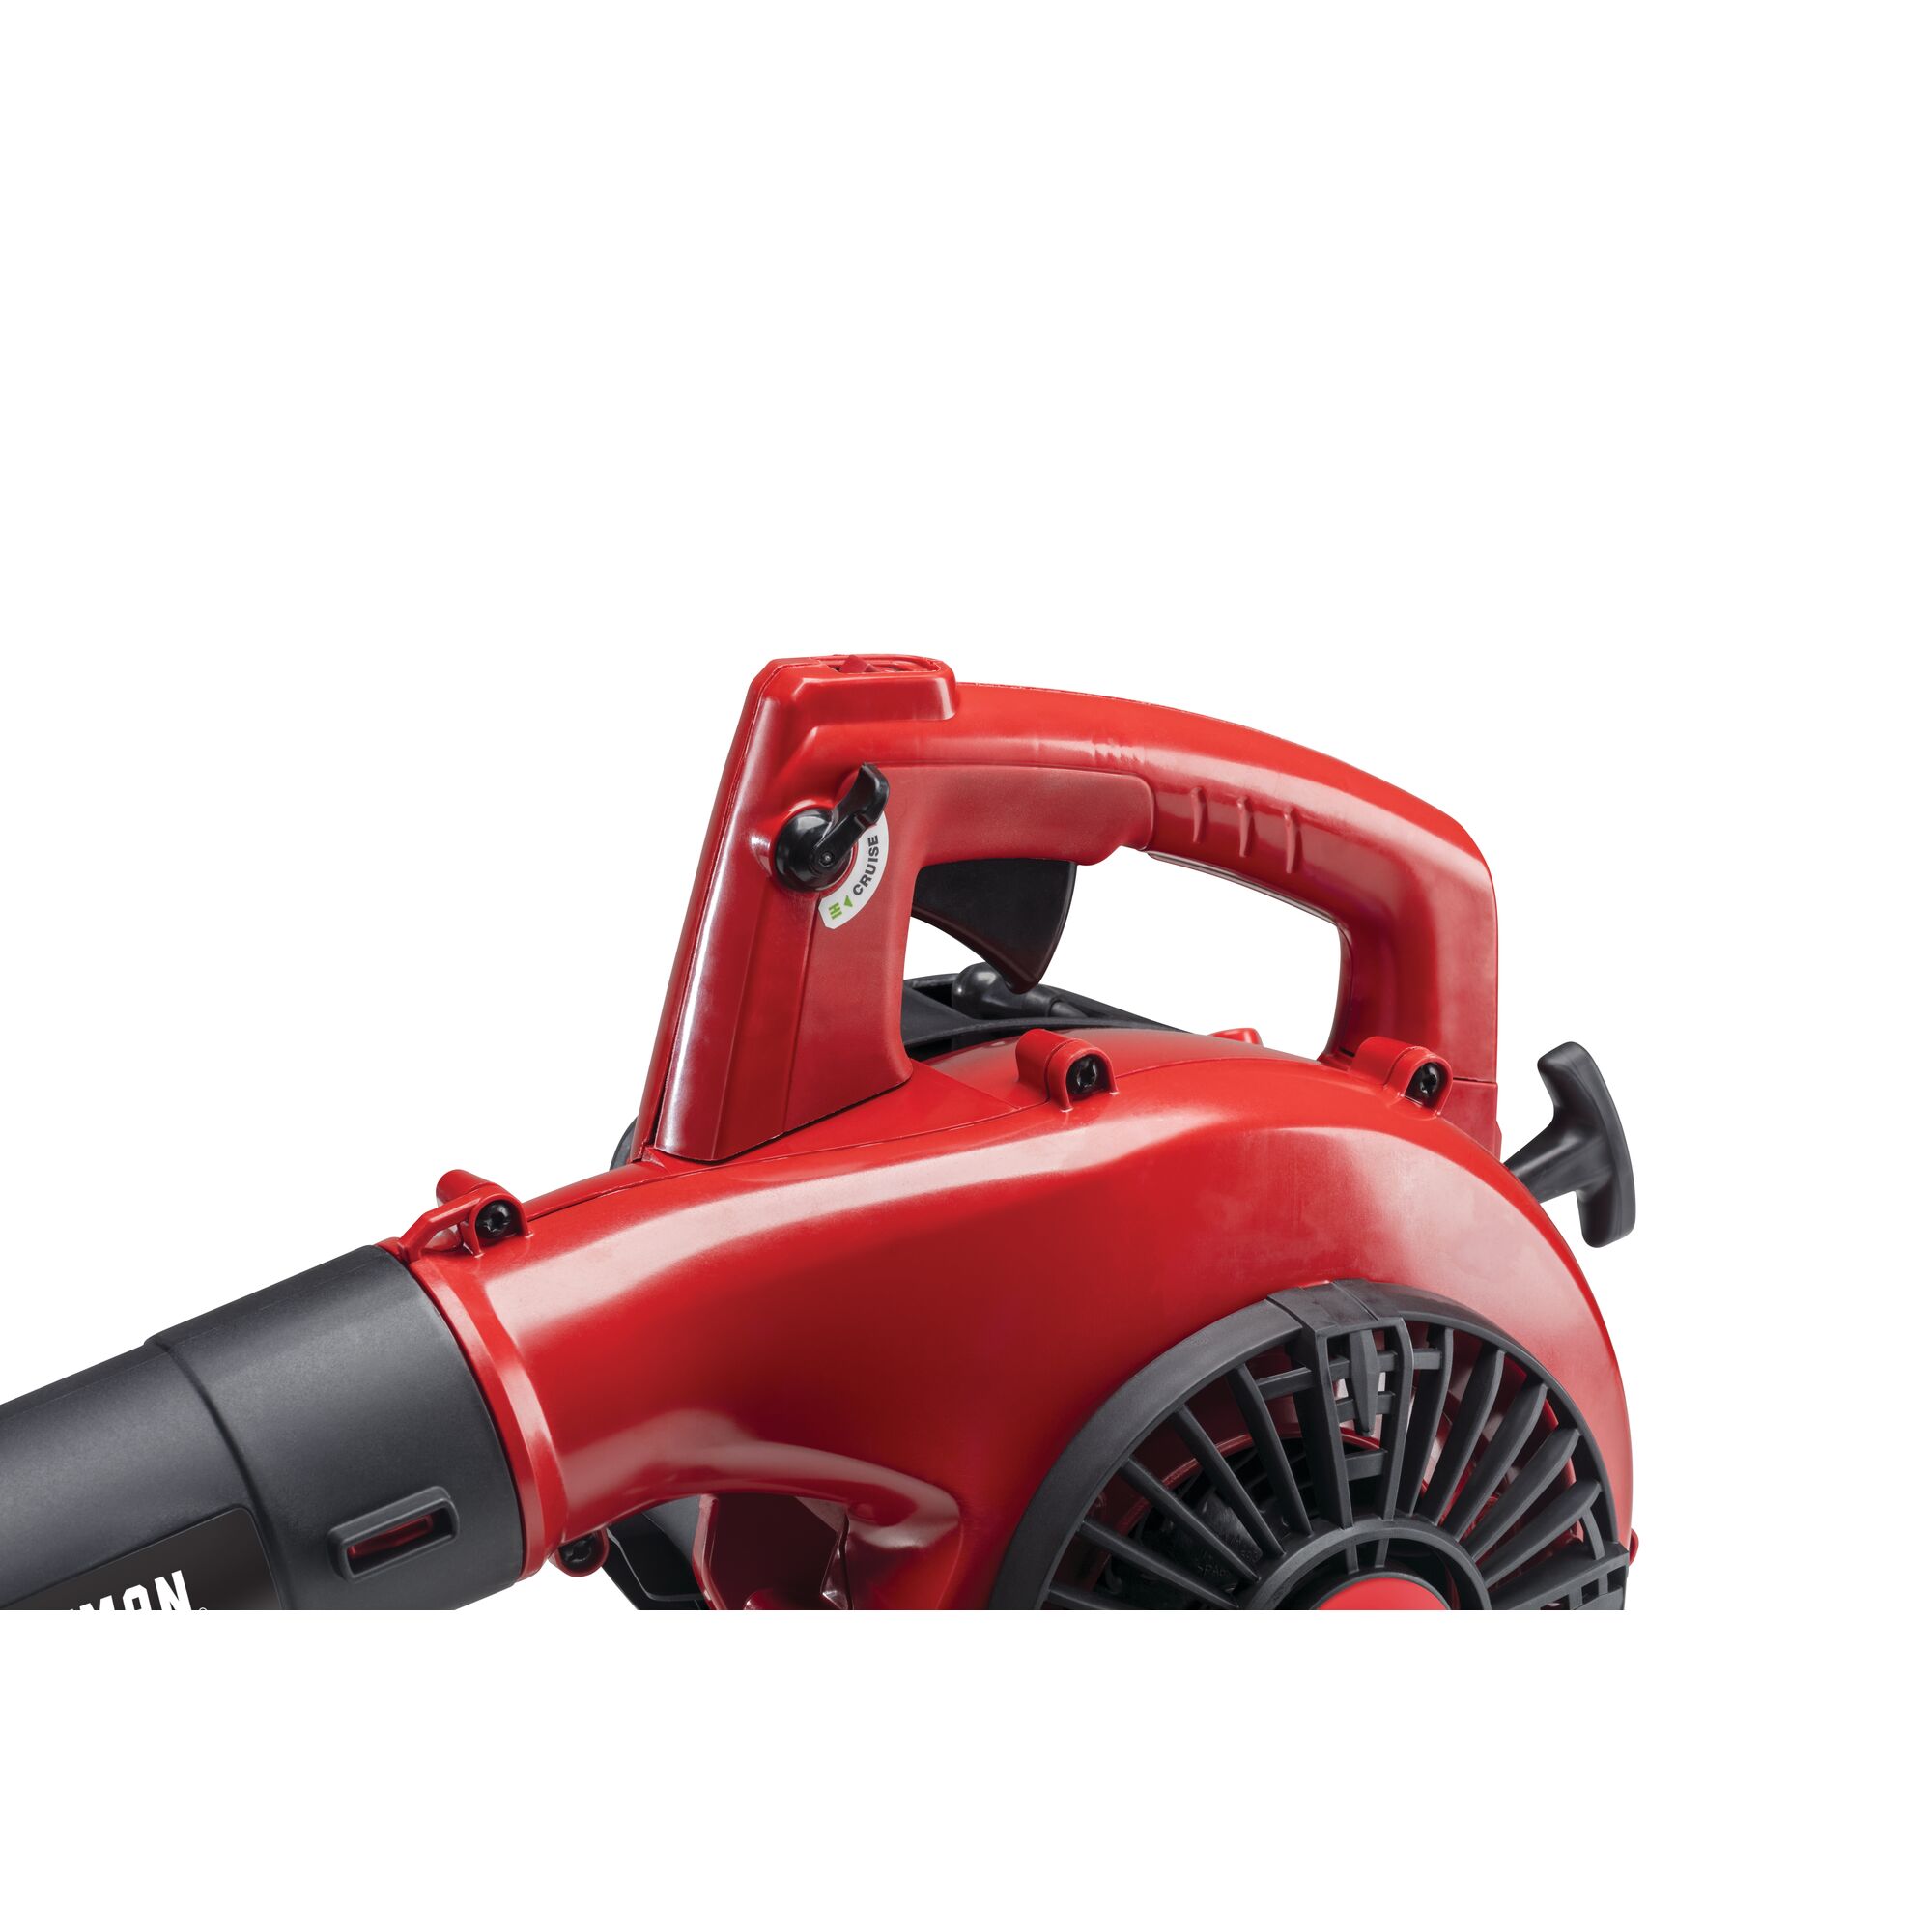 Cruise control feature of 25 C C 2 cycle gas leaf blower.